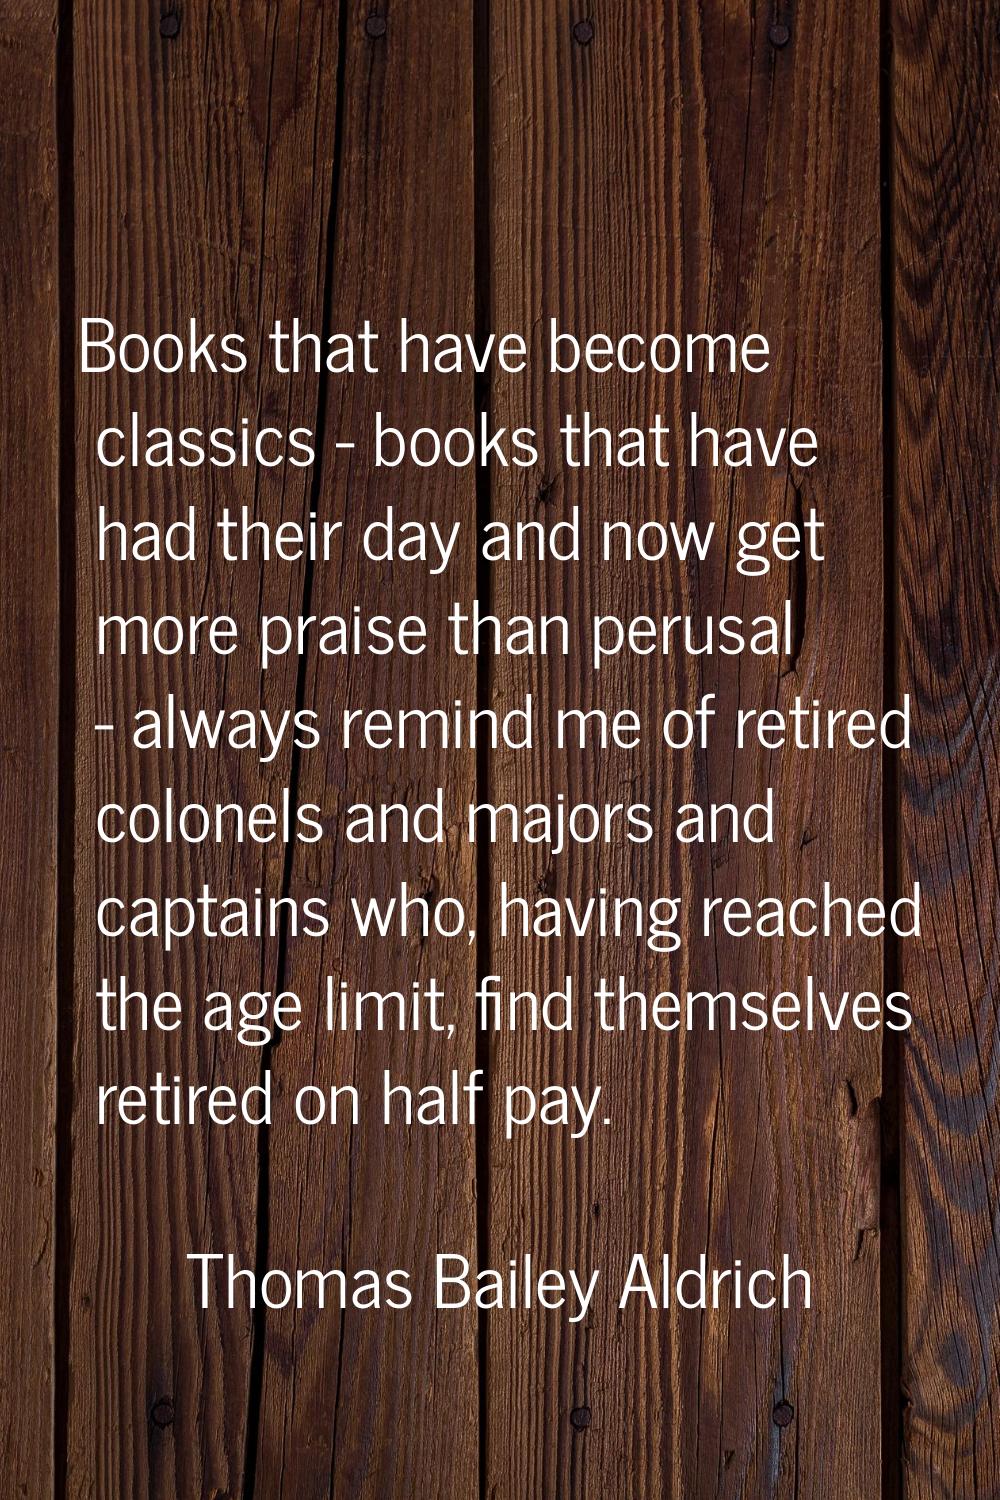 Books that have become classics - books that have had their day and now get more praise than perusa